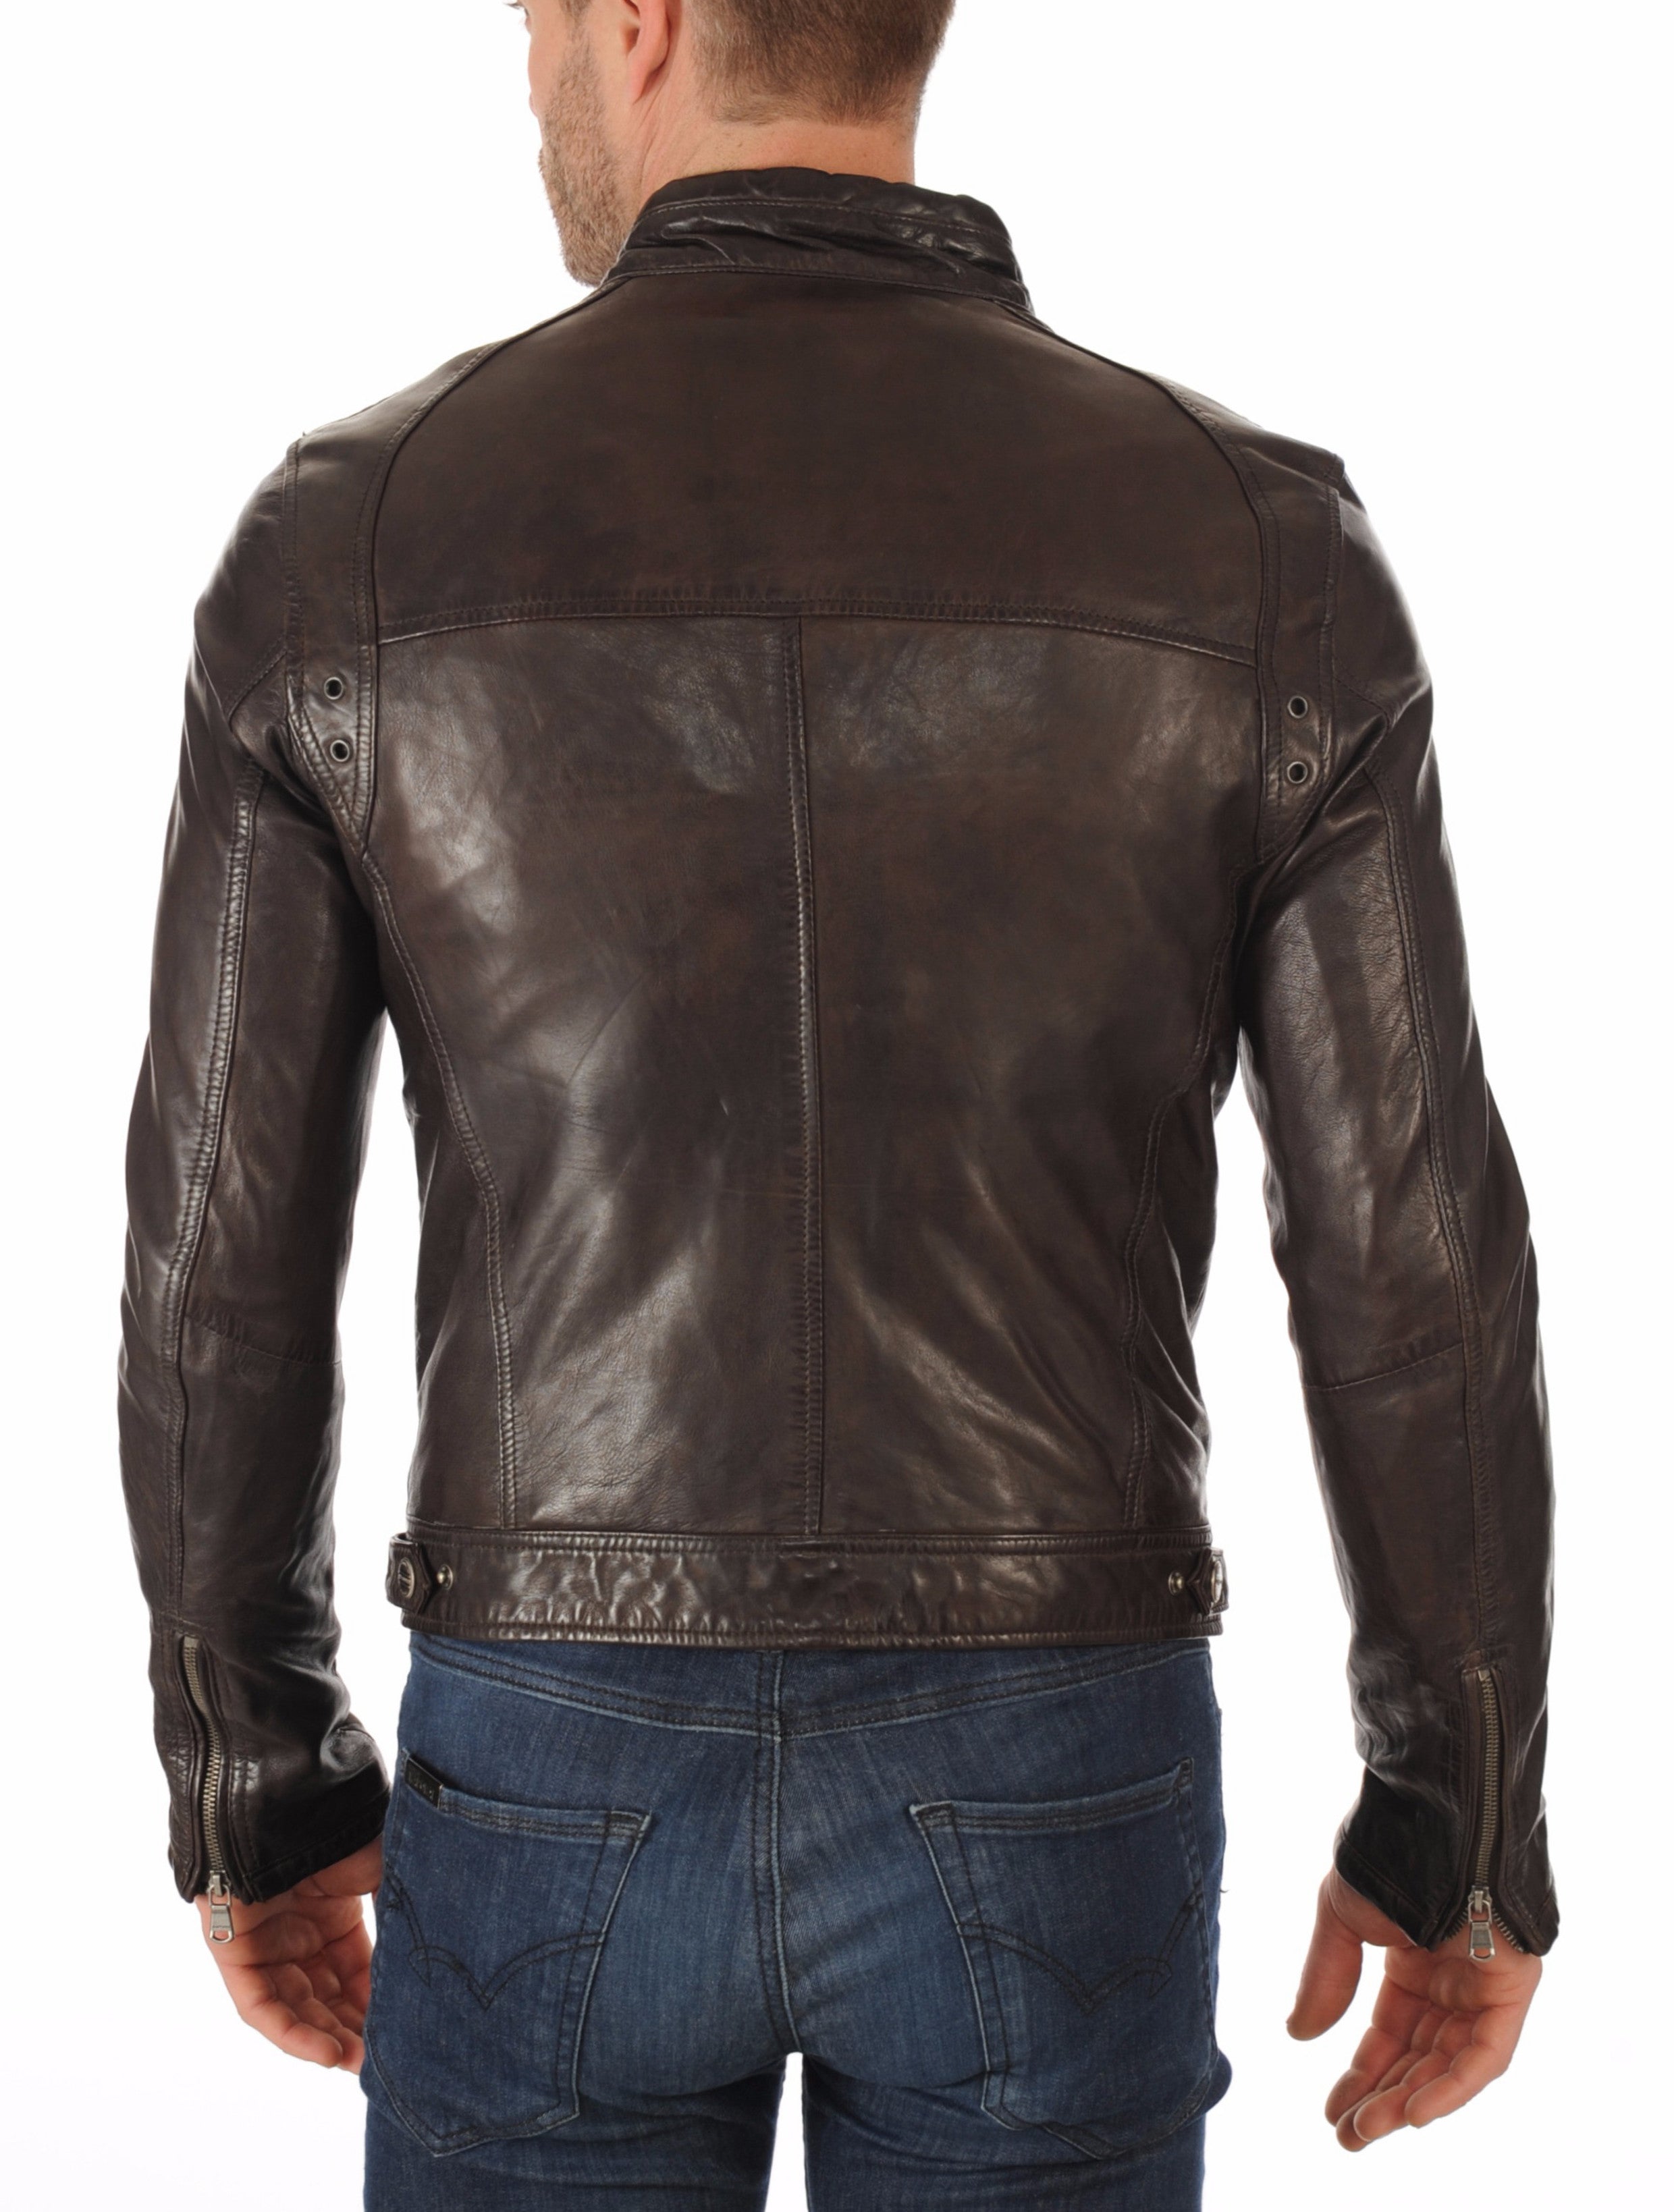 Levi Men's Leather Jacket (Real Leather) #547